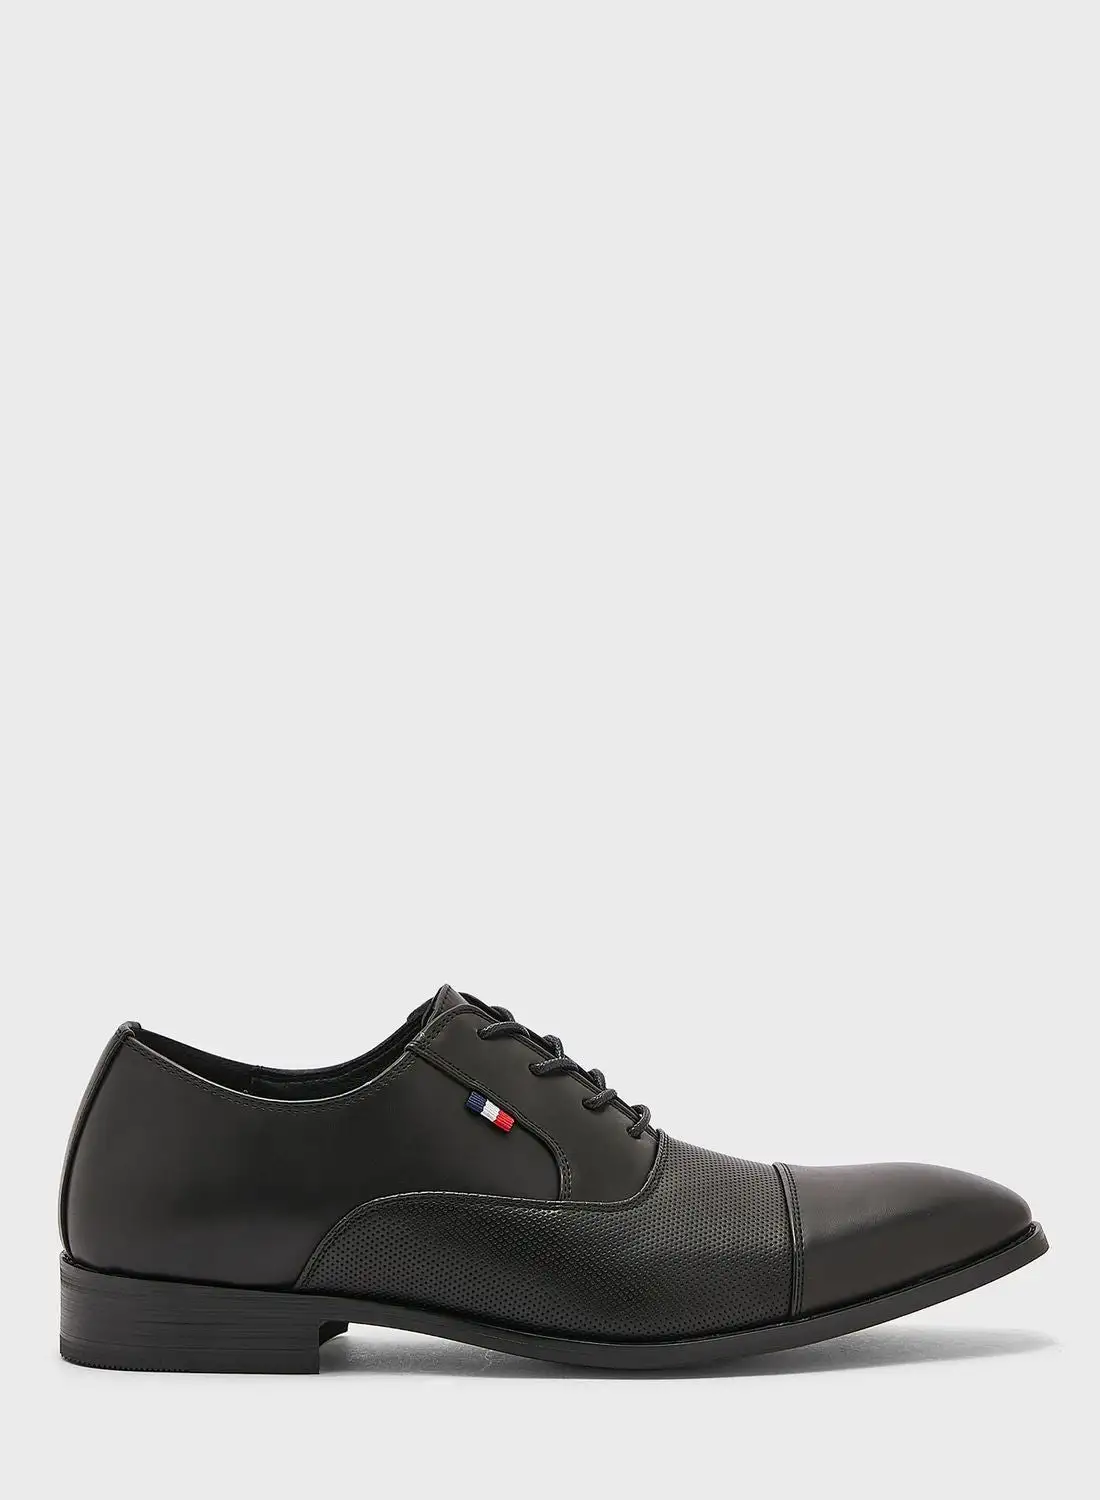 Robert Wood Classic Oxford Formal Lace Up